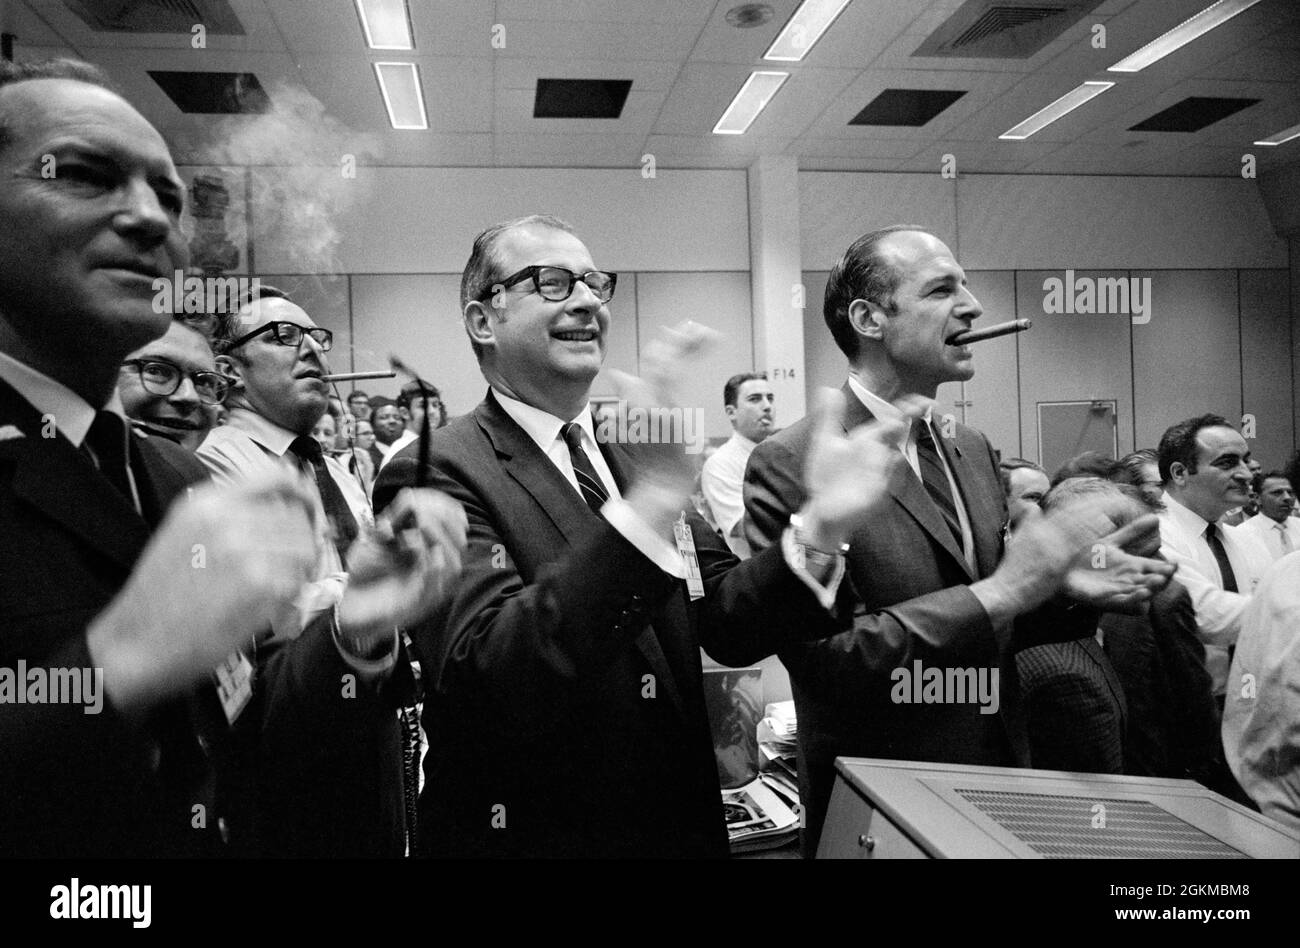 (17 April 1970) --- Staff members from NASA Headquarters (NASA HQ), Manned Spacecraft Center (MSC), and Dr. Thomas Paine (center of frame) applaud the successful splashdown of the Apollo 13 mission while Dr. George Low smokes a cigar (right), in the MSC Mission Control Center (MCC), located in Building 30. Apollo 13 crewmembers, astronauts James A. Lovell Jr., commander; John L. Swigert Jr., command module pilot; and Fred W. Haise Jr., lunar module pilot, splashed down at 12:07:44 p.m. (CST), April 17, 1970, in the south Pacific Ocean. Stock Photo